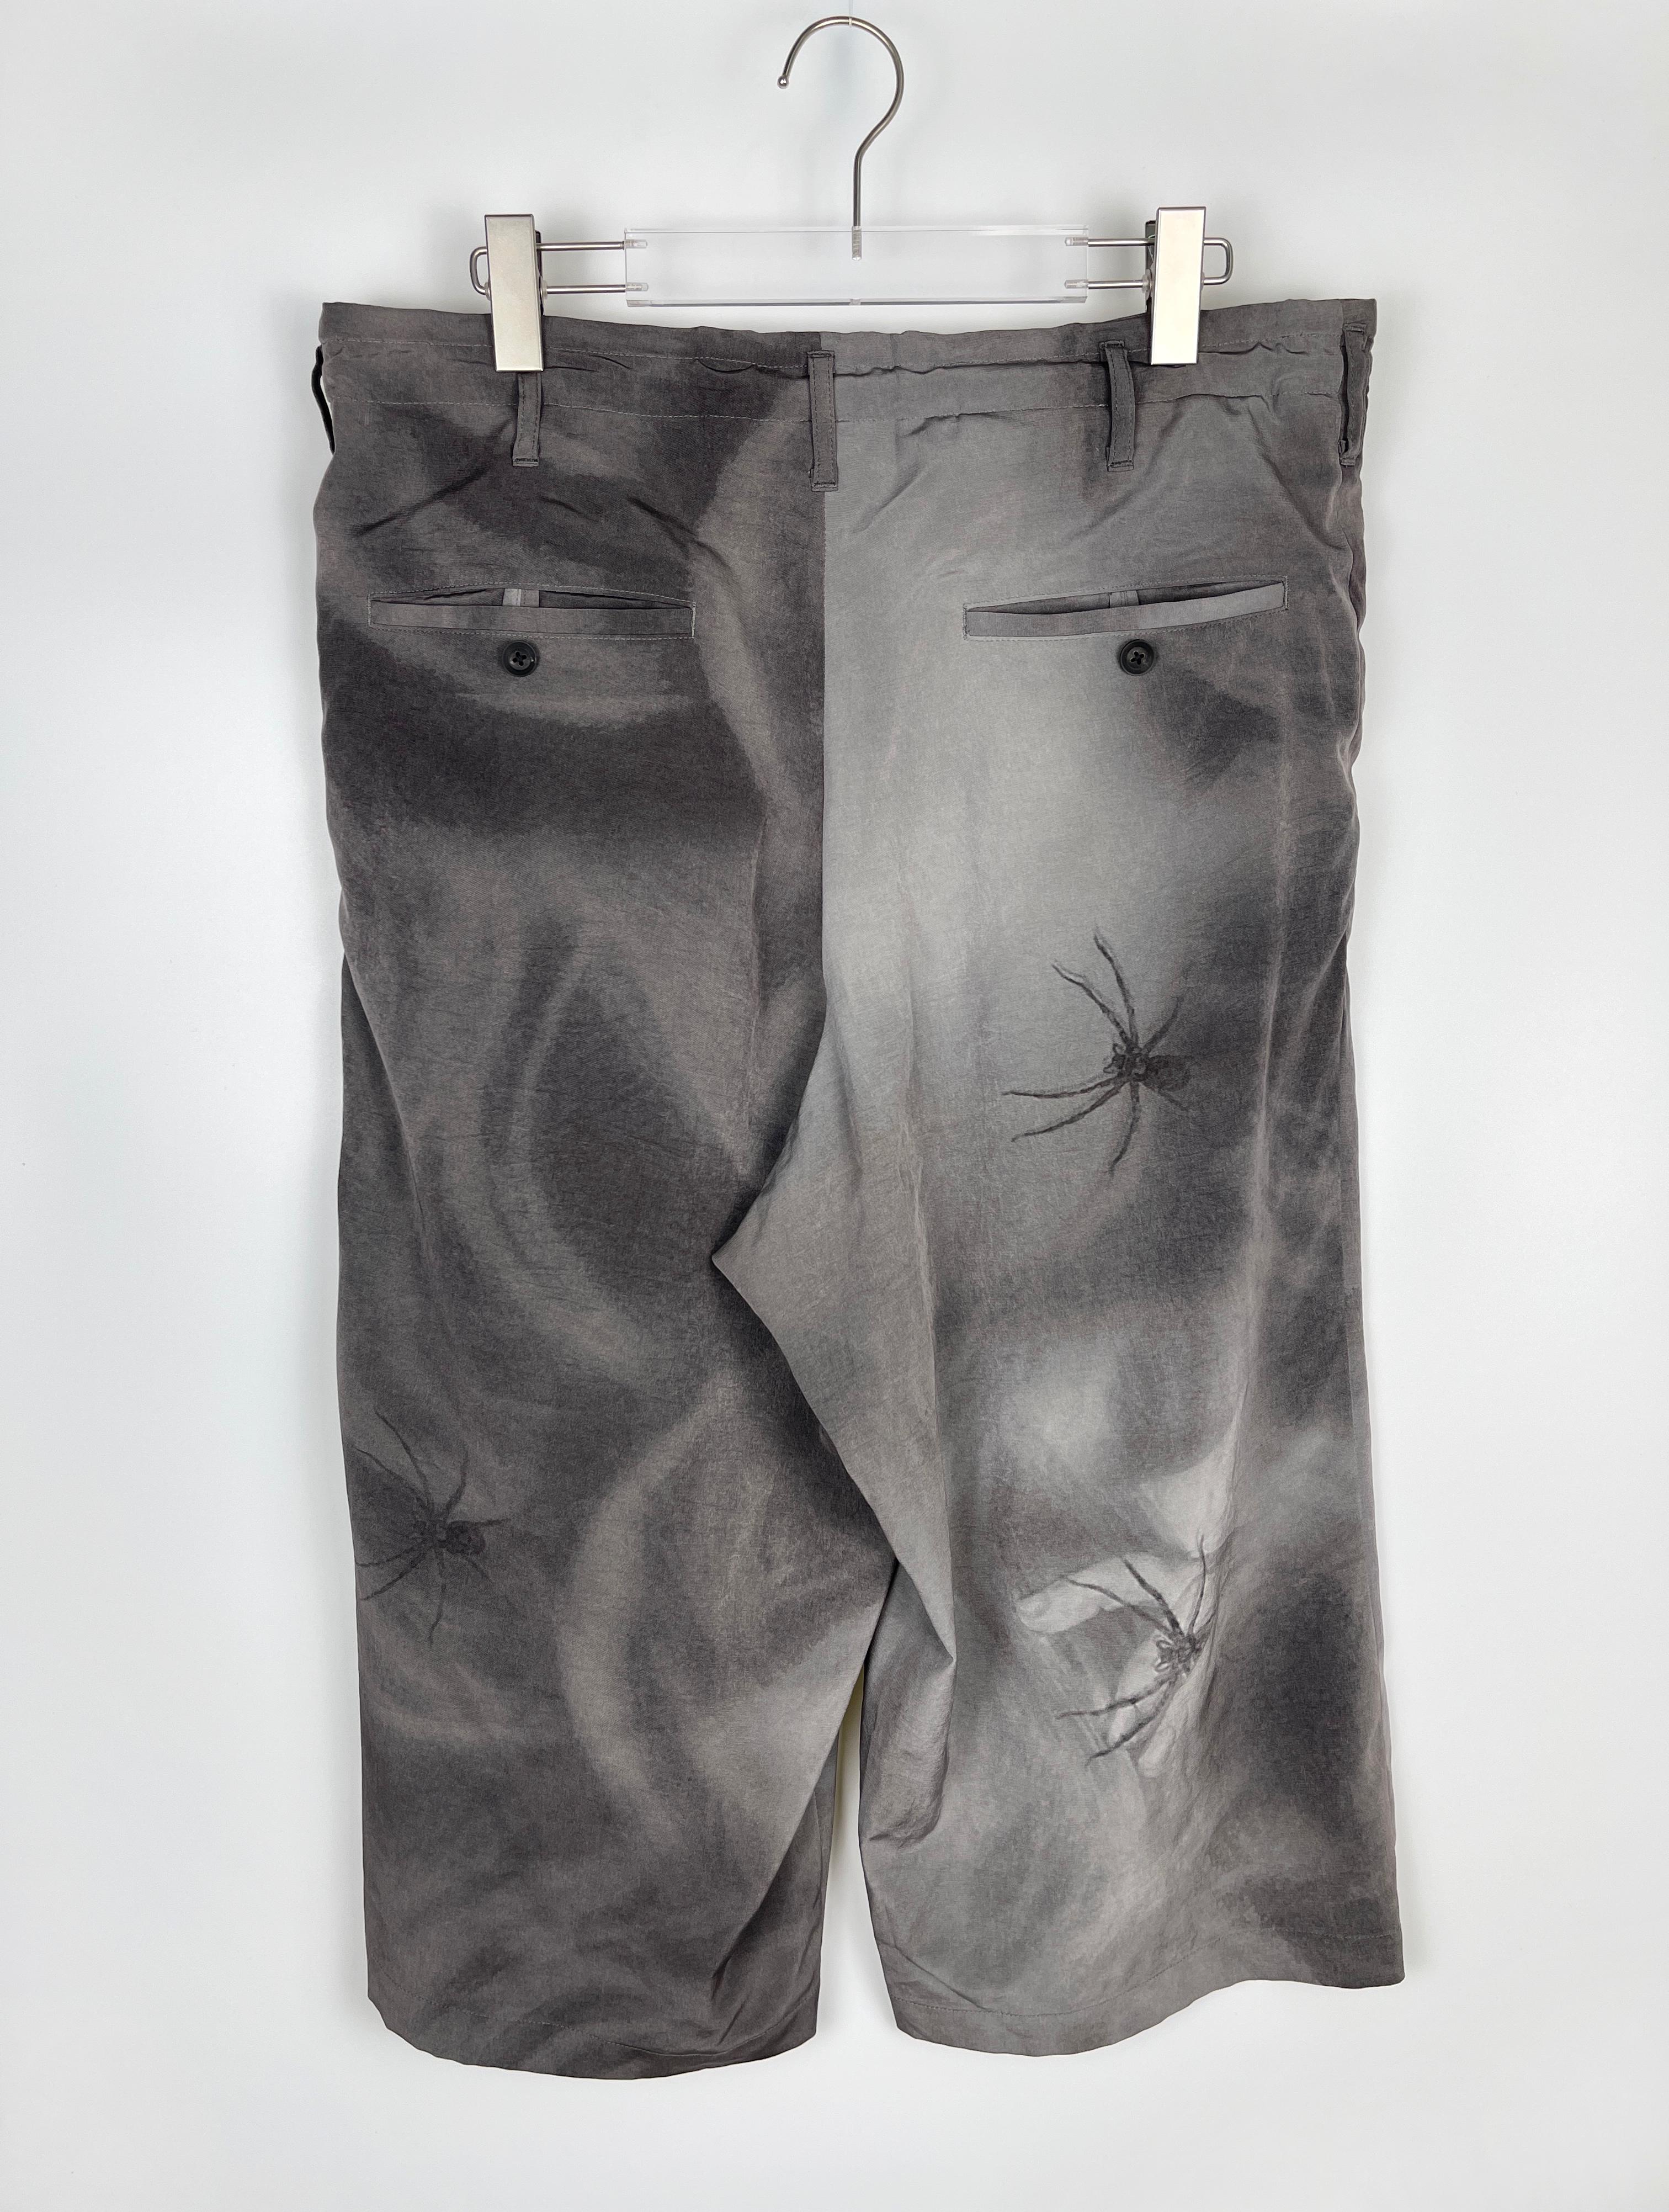 Yohji Yamamoto Pour Homme S/S20 Suzume Uchida Spider Shorts In Excellent Condition For Sale In Seattle, WA